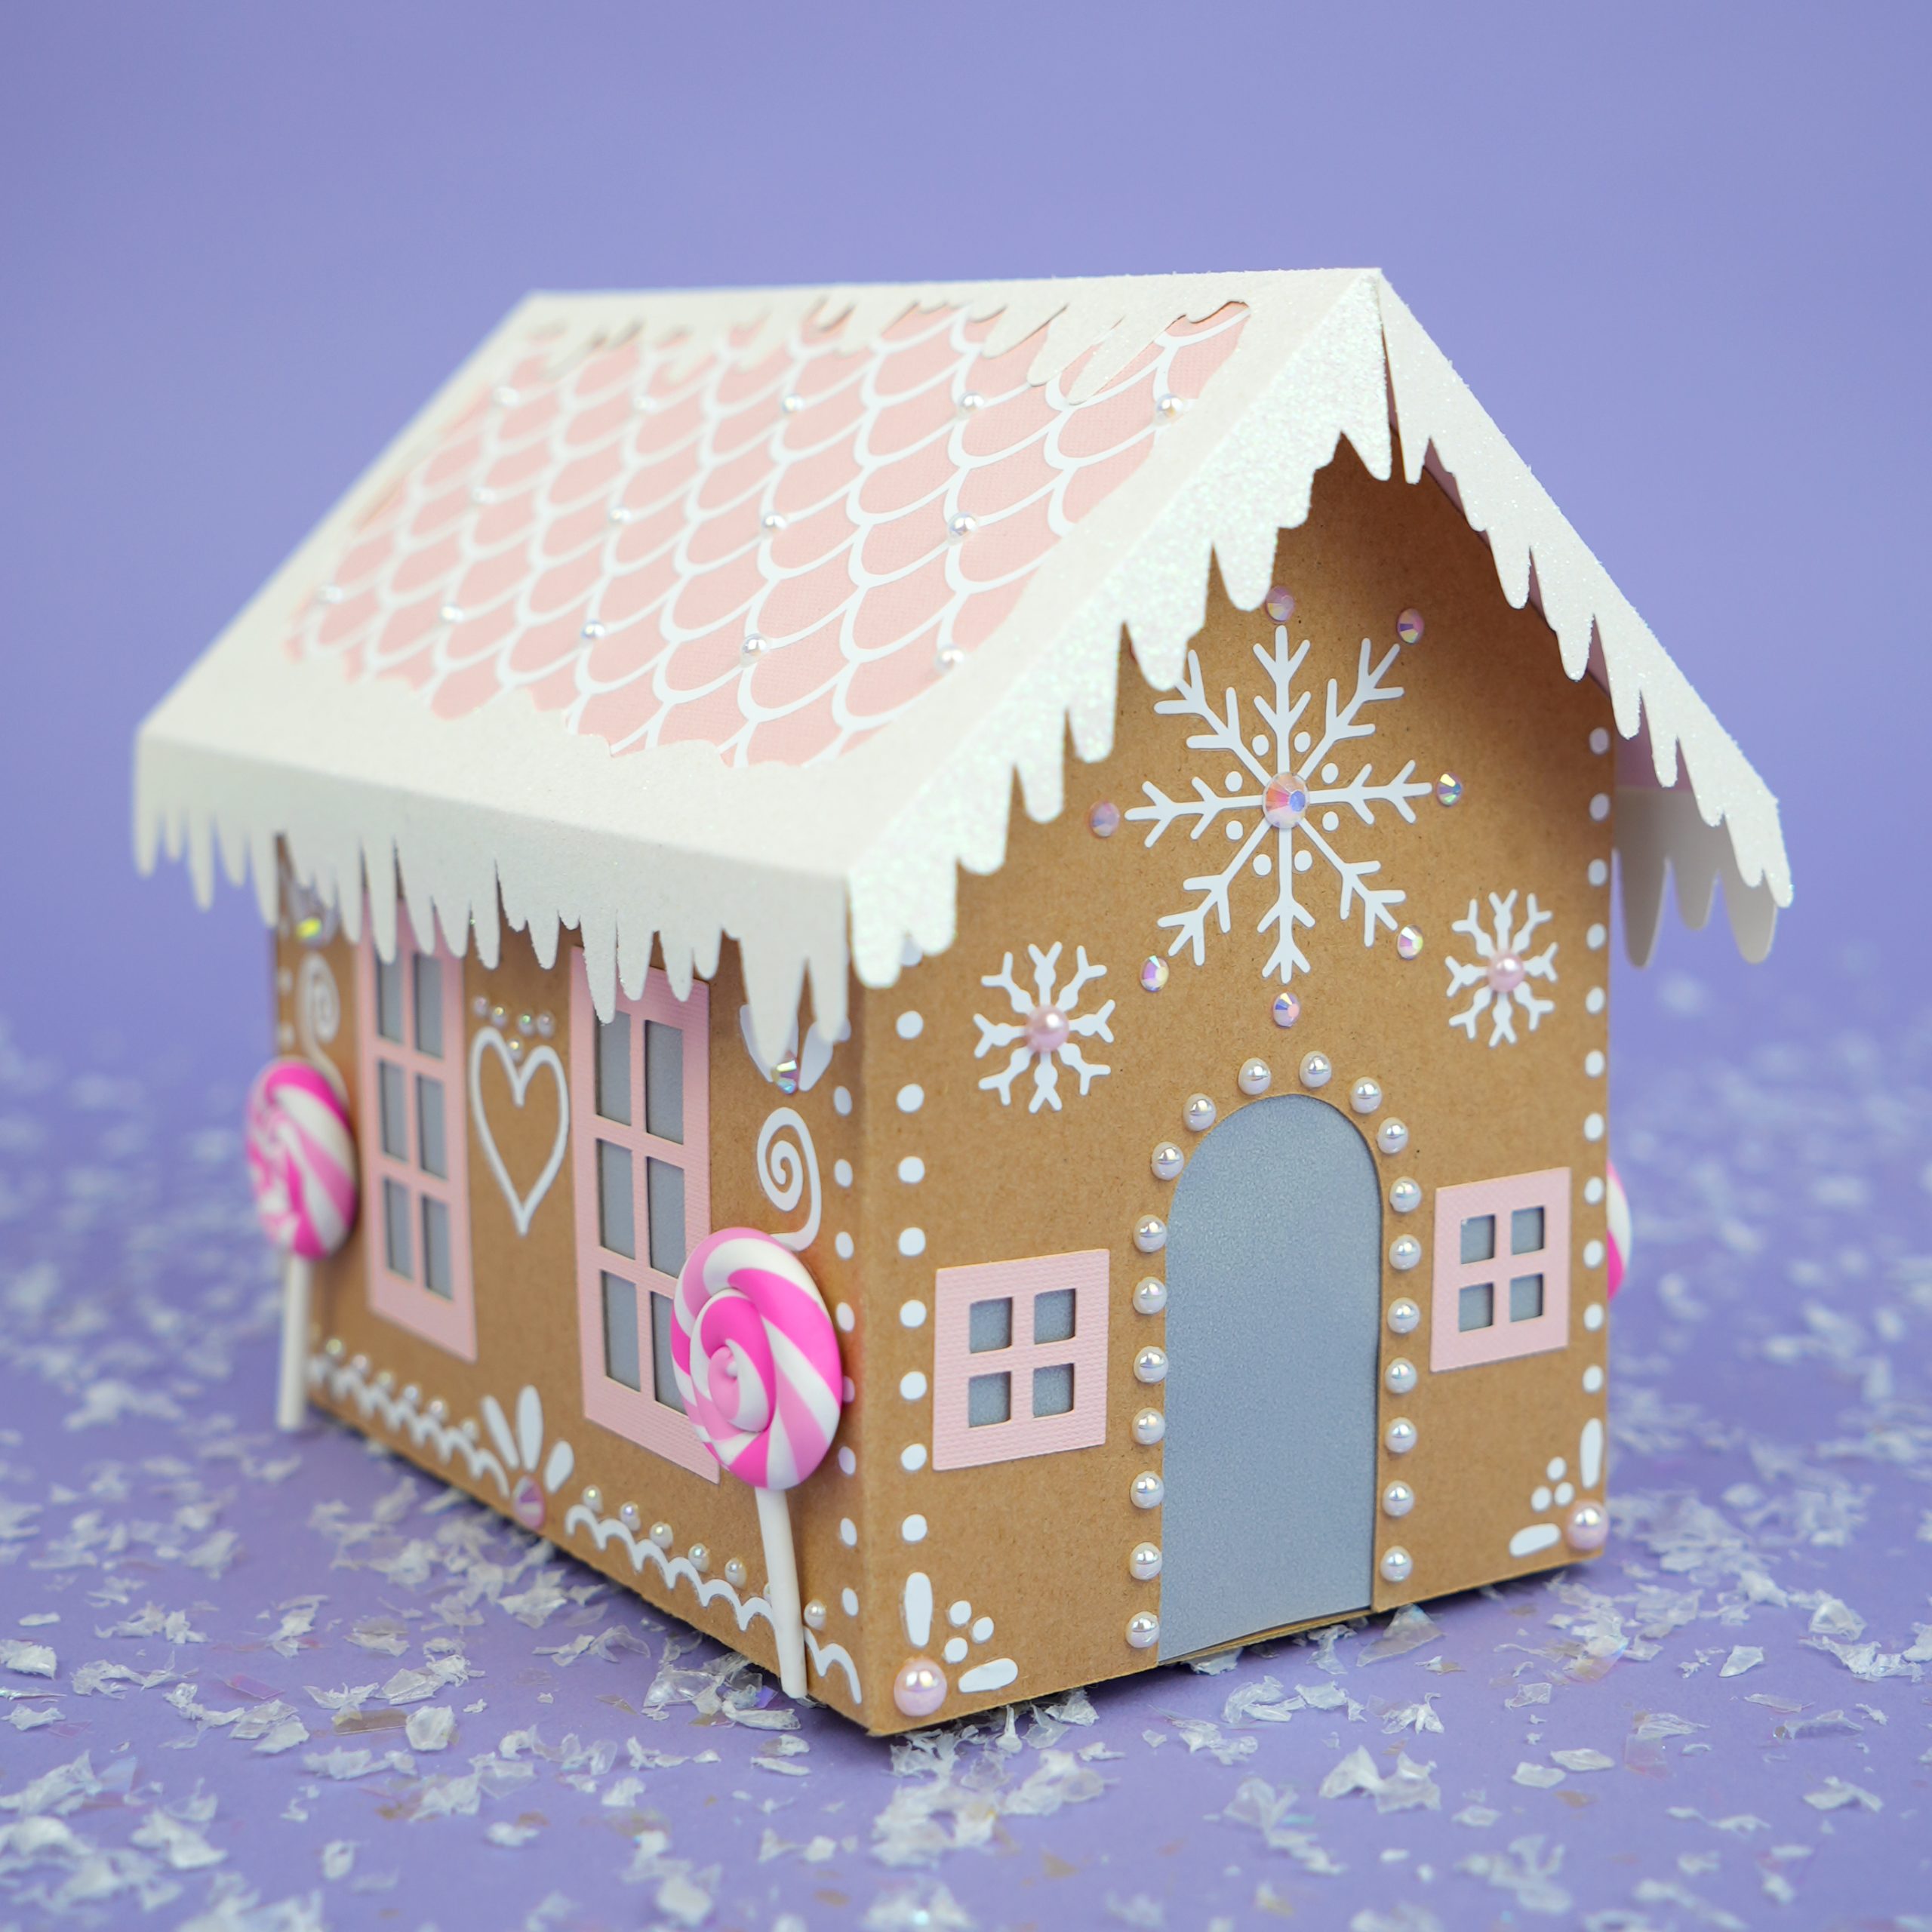 Pastel pink and white decorated paper gingerbread house with pearls and rhinestones on lavender background with faux snow